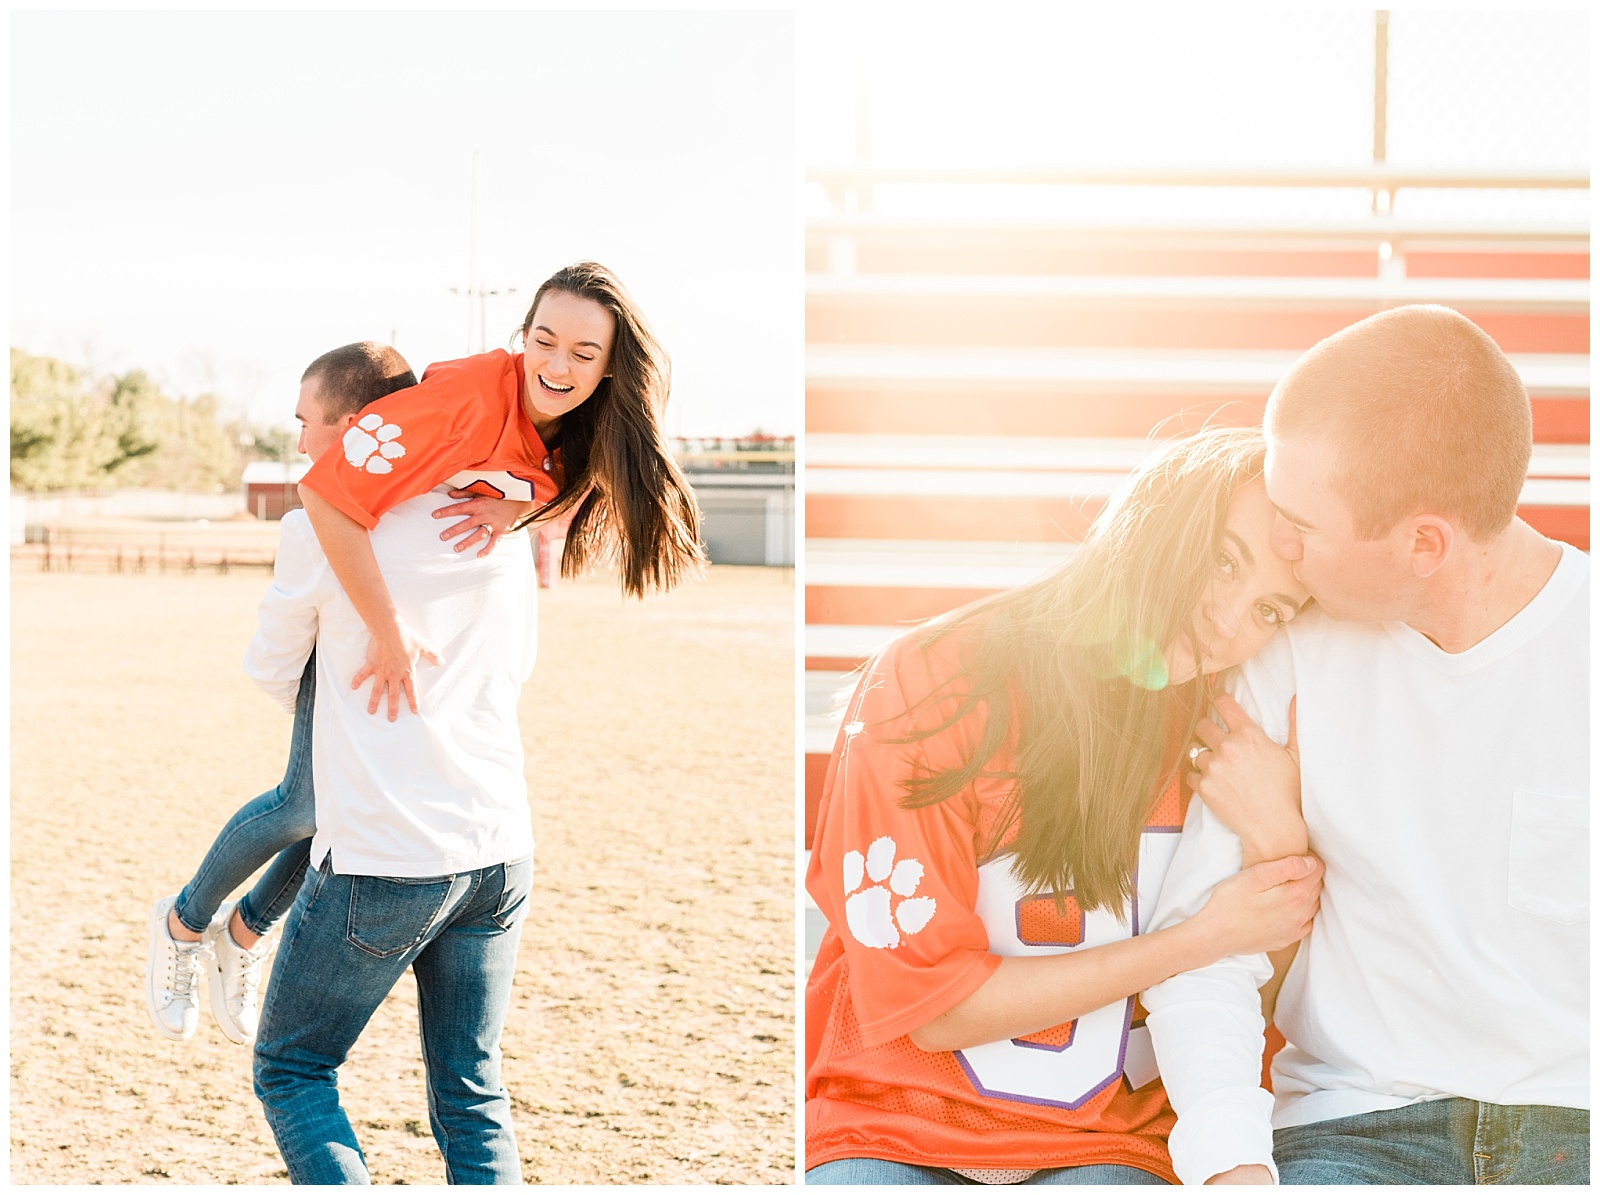 New Jersey, Engagement Session, Wedding Photographer, NFL, Coach, LA Chargers, Football, Athletic, Sporty, Jersey, Golden Hour, Playful